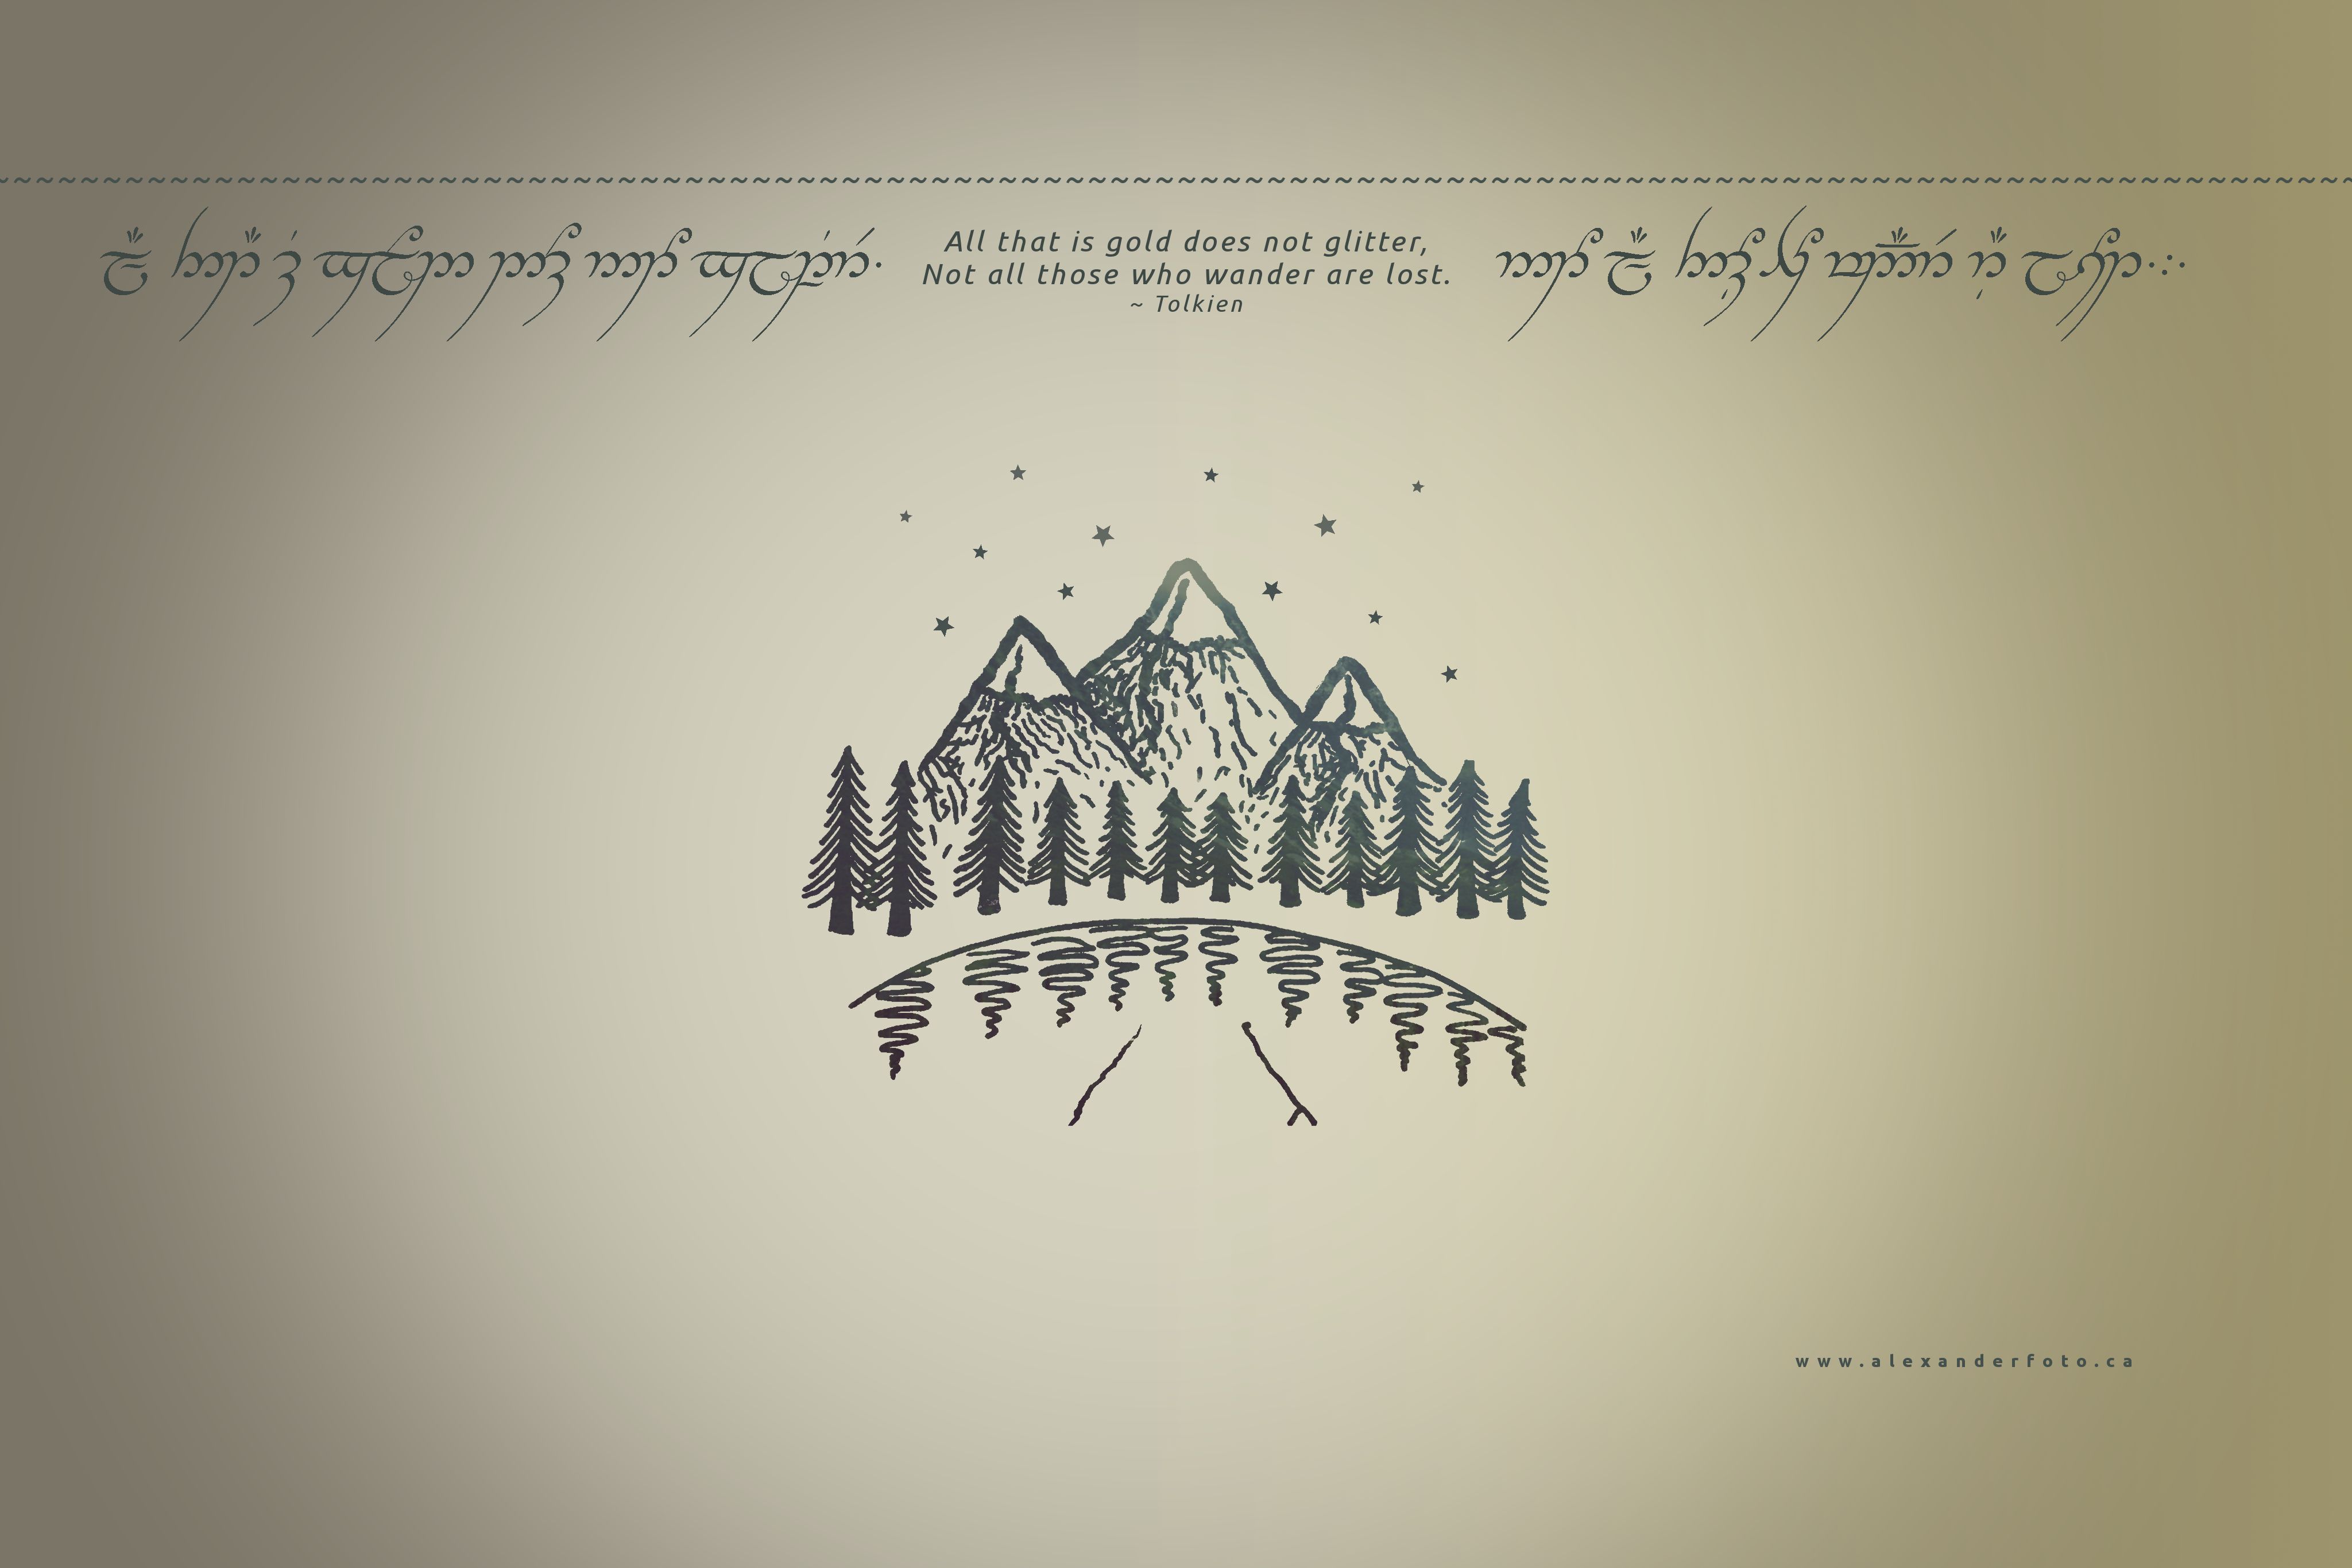 Lord of the Rings Wallpaper I made using a marker drawing and digital editing